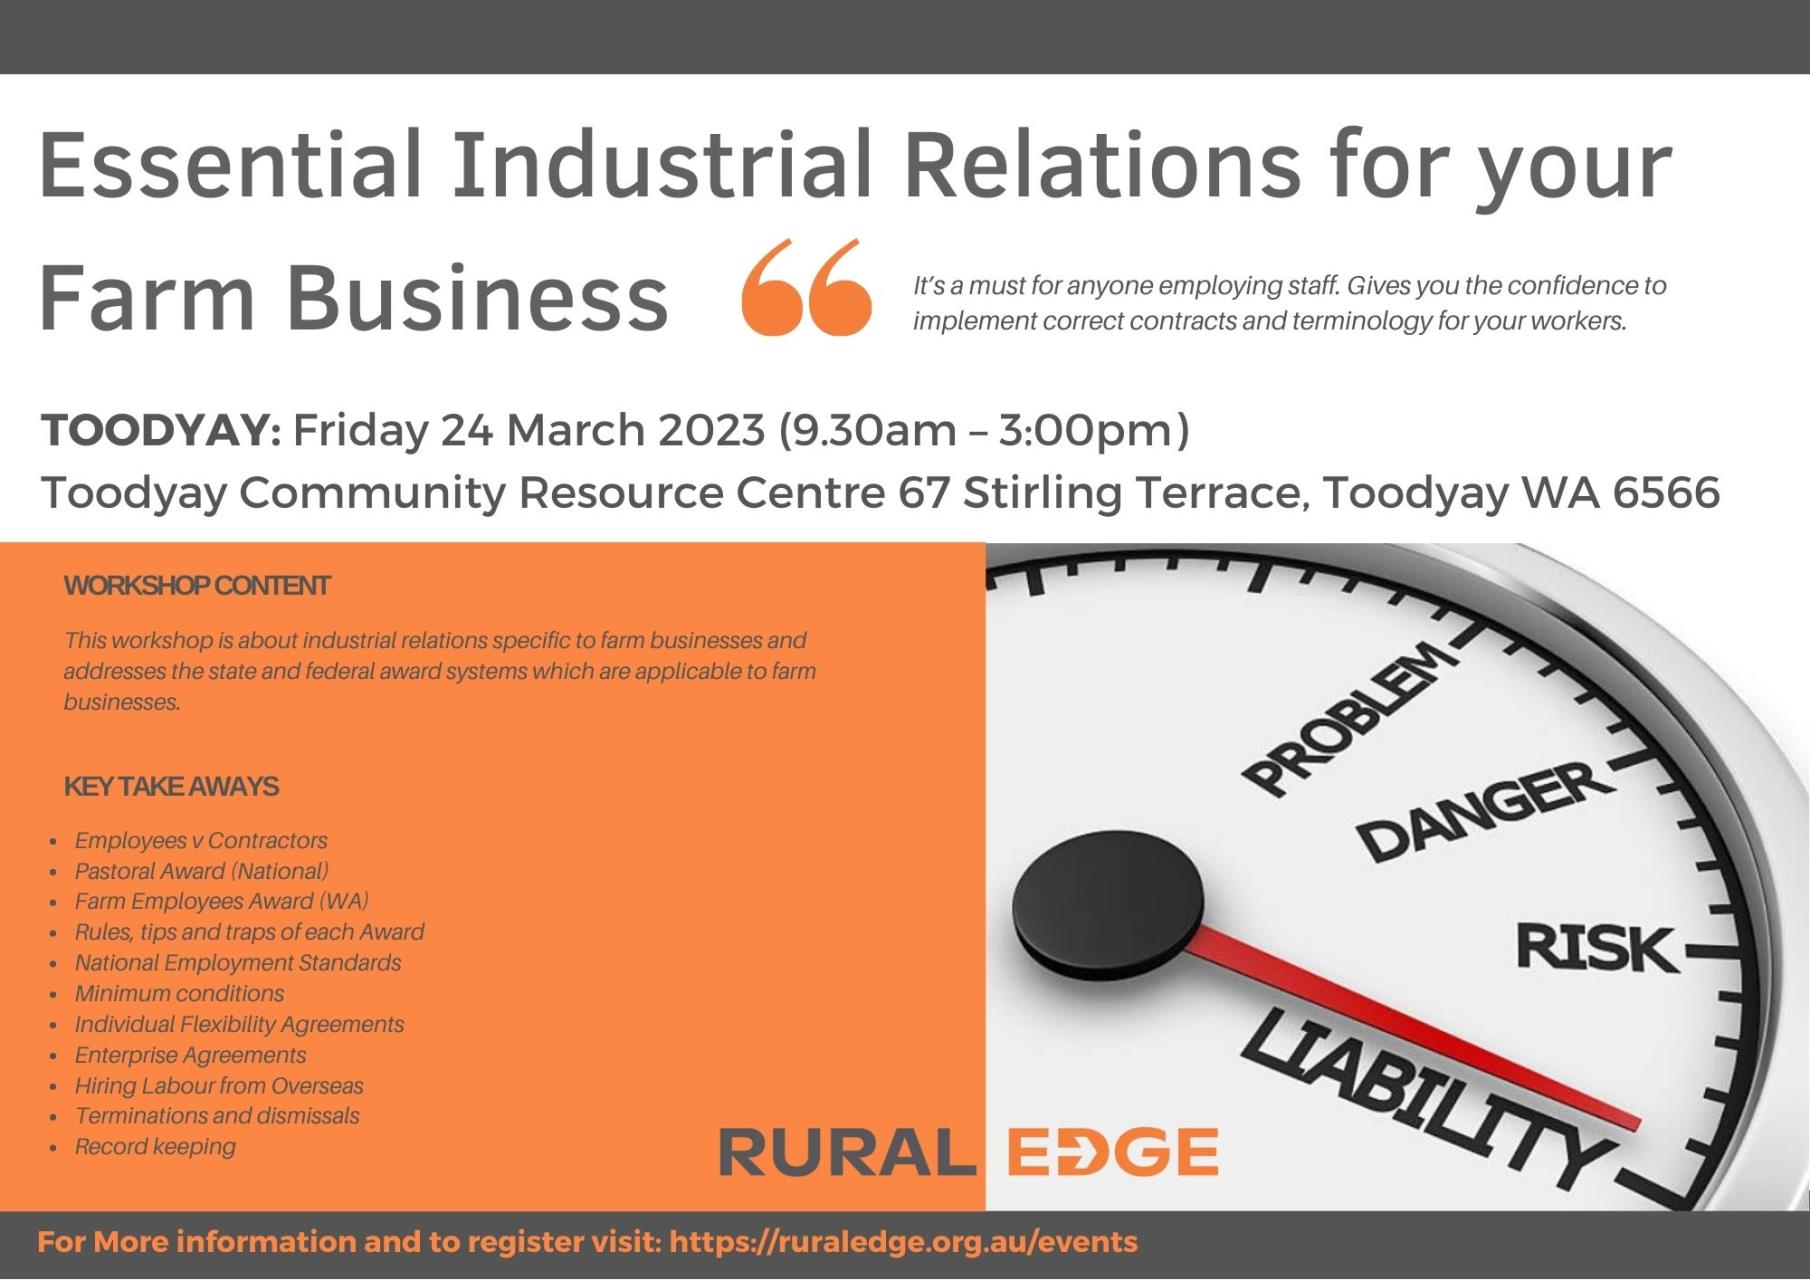 Essential Industrial Relations for Farm Businesses - Rural Edge